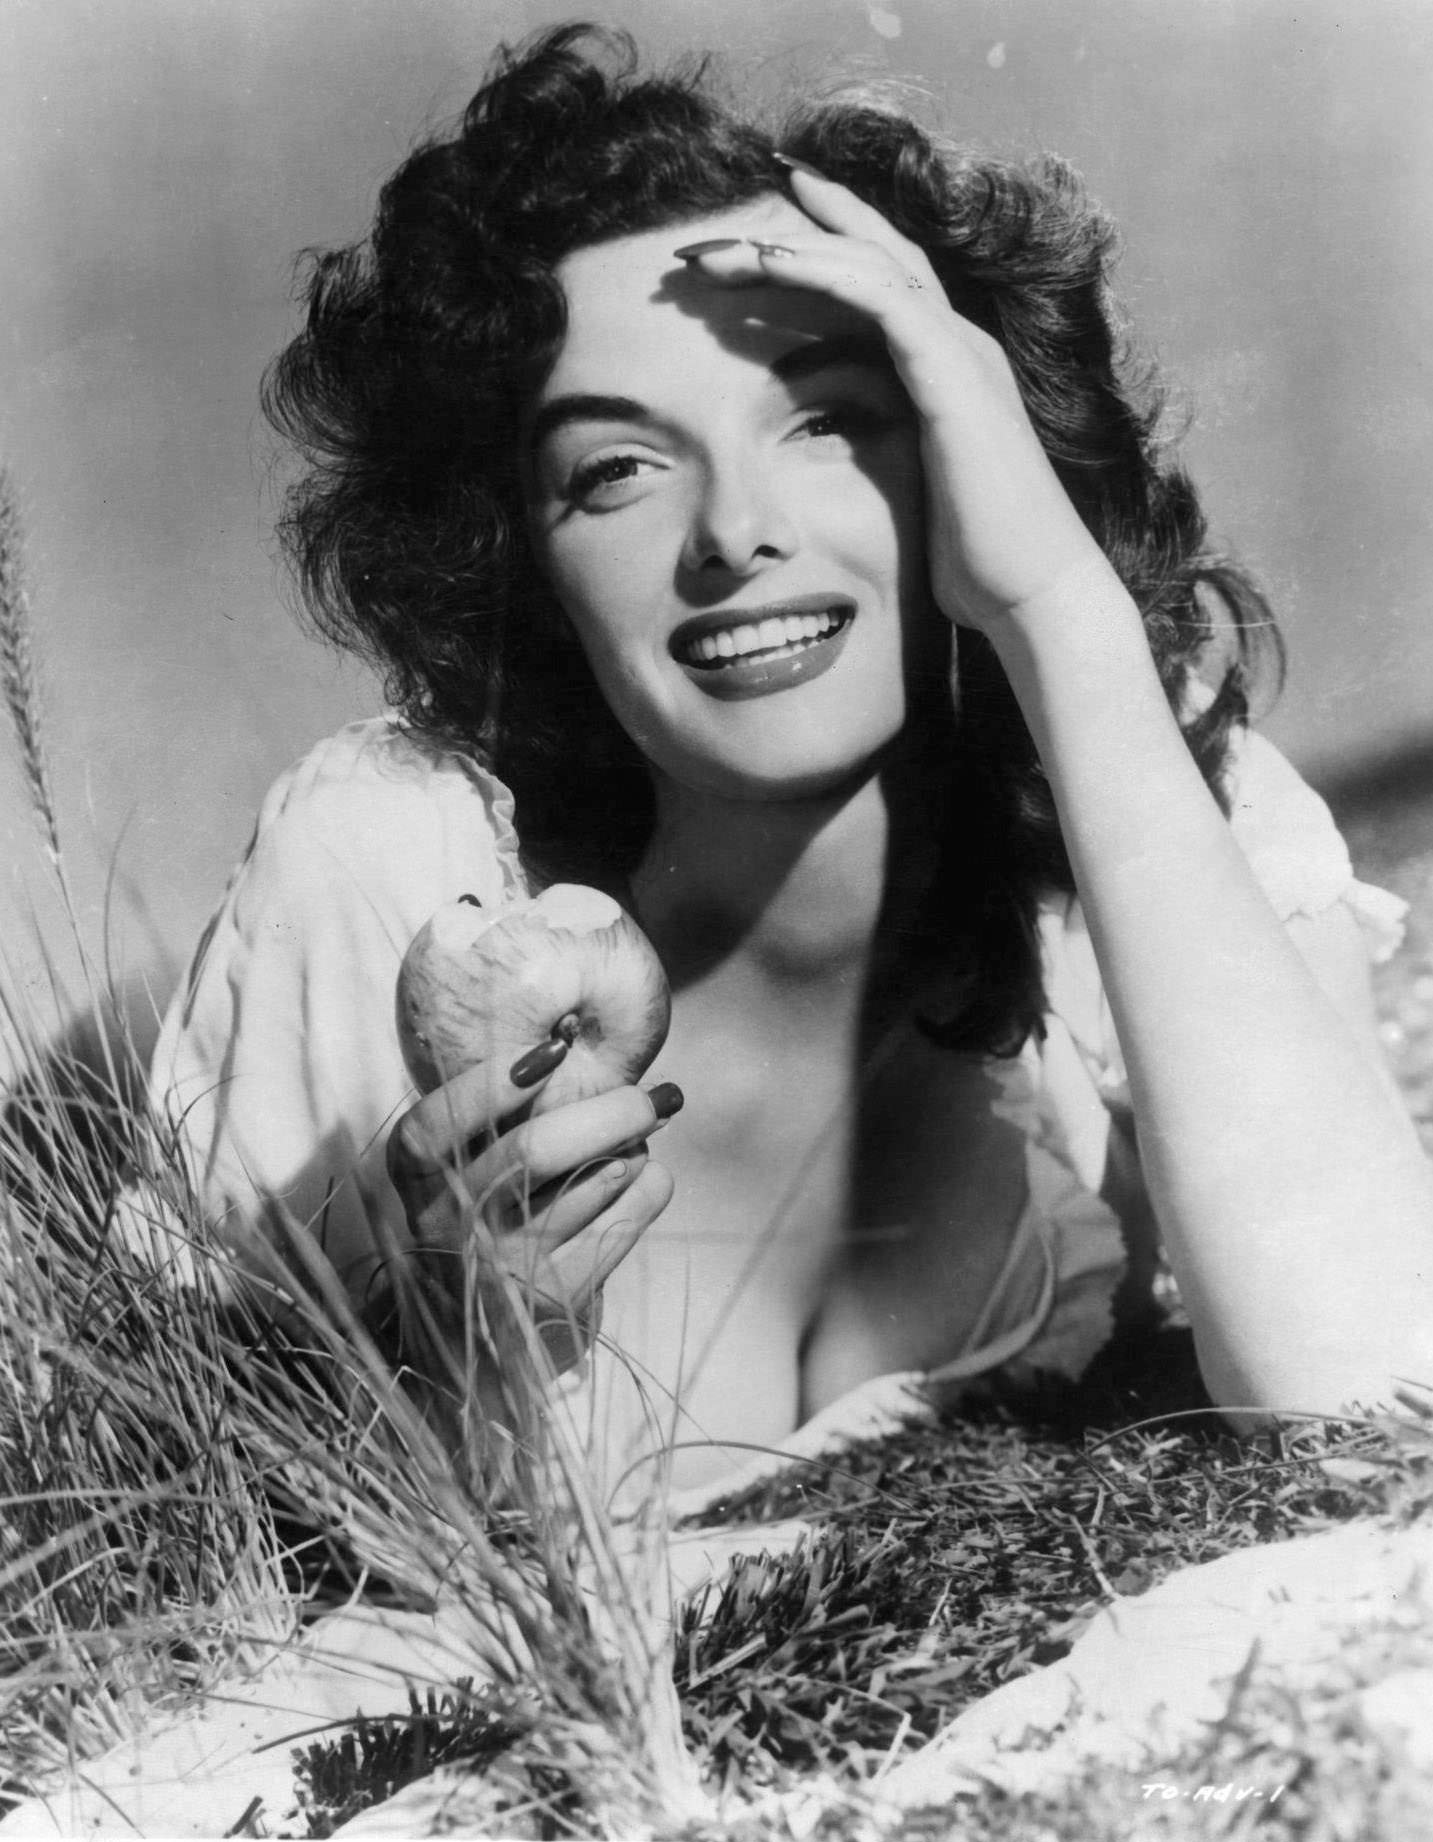 Jane Russell publicity portrait for the film 'The Outlaw', 1943.